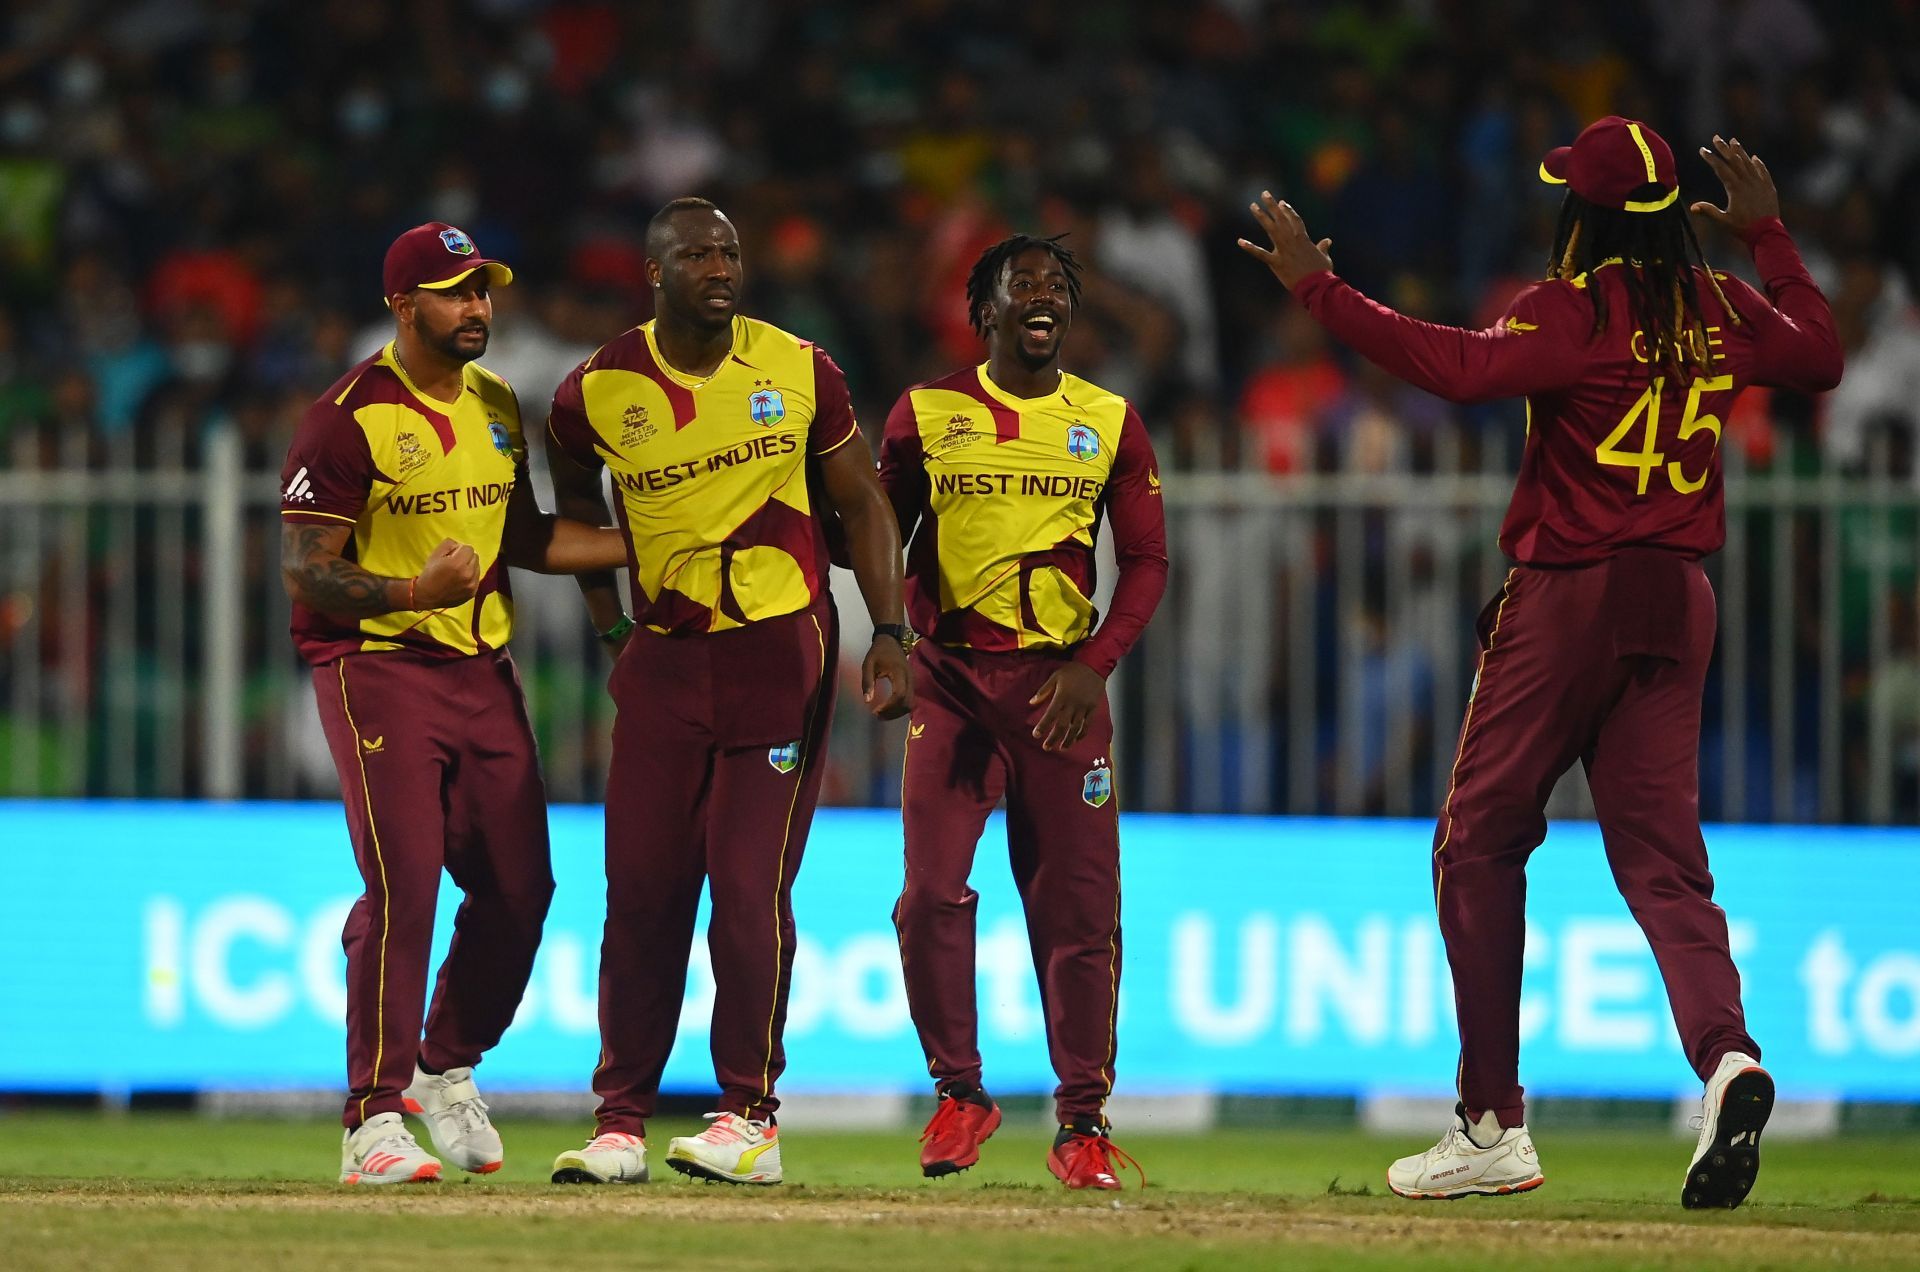 Andre Russell helped West Indies record a close win against Bangladesh